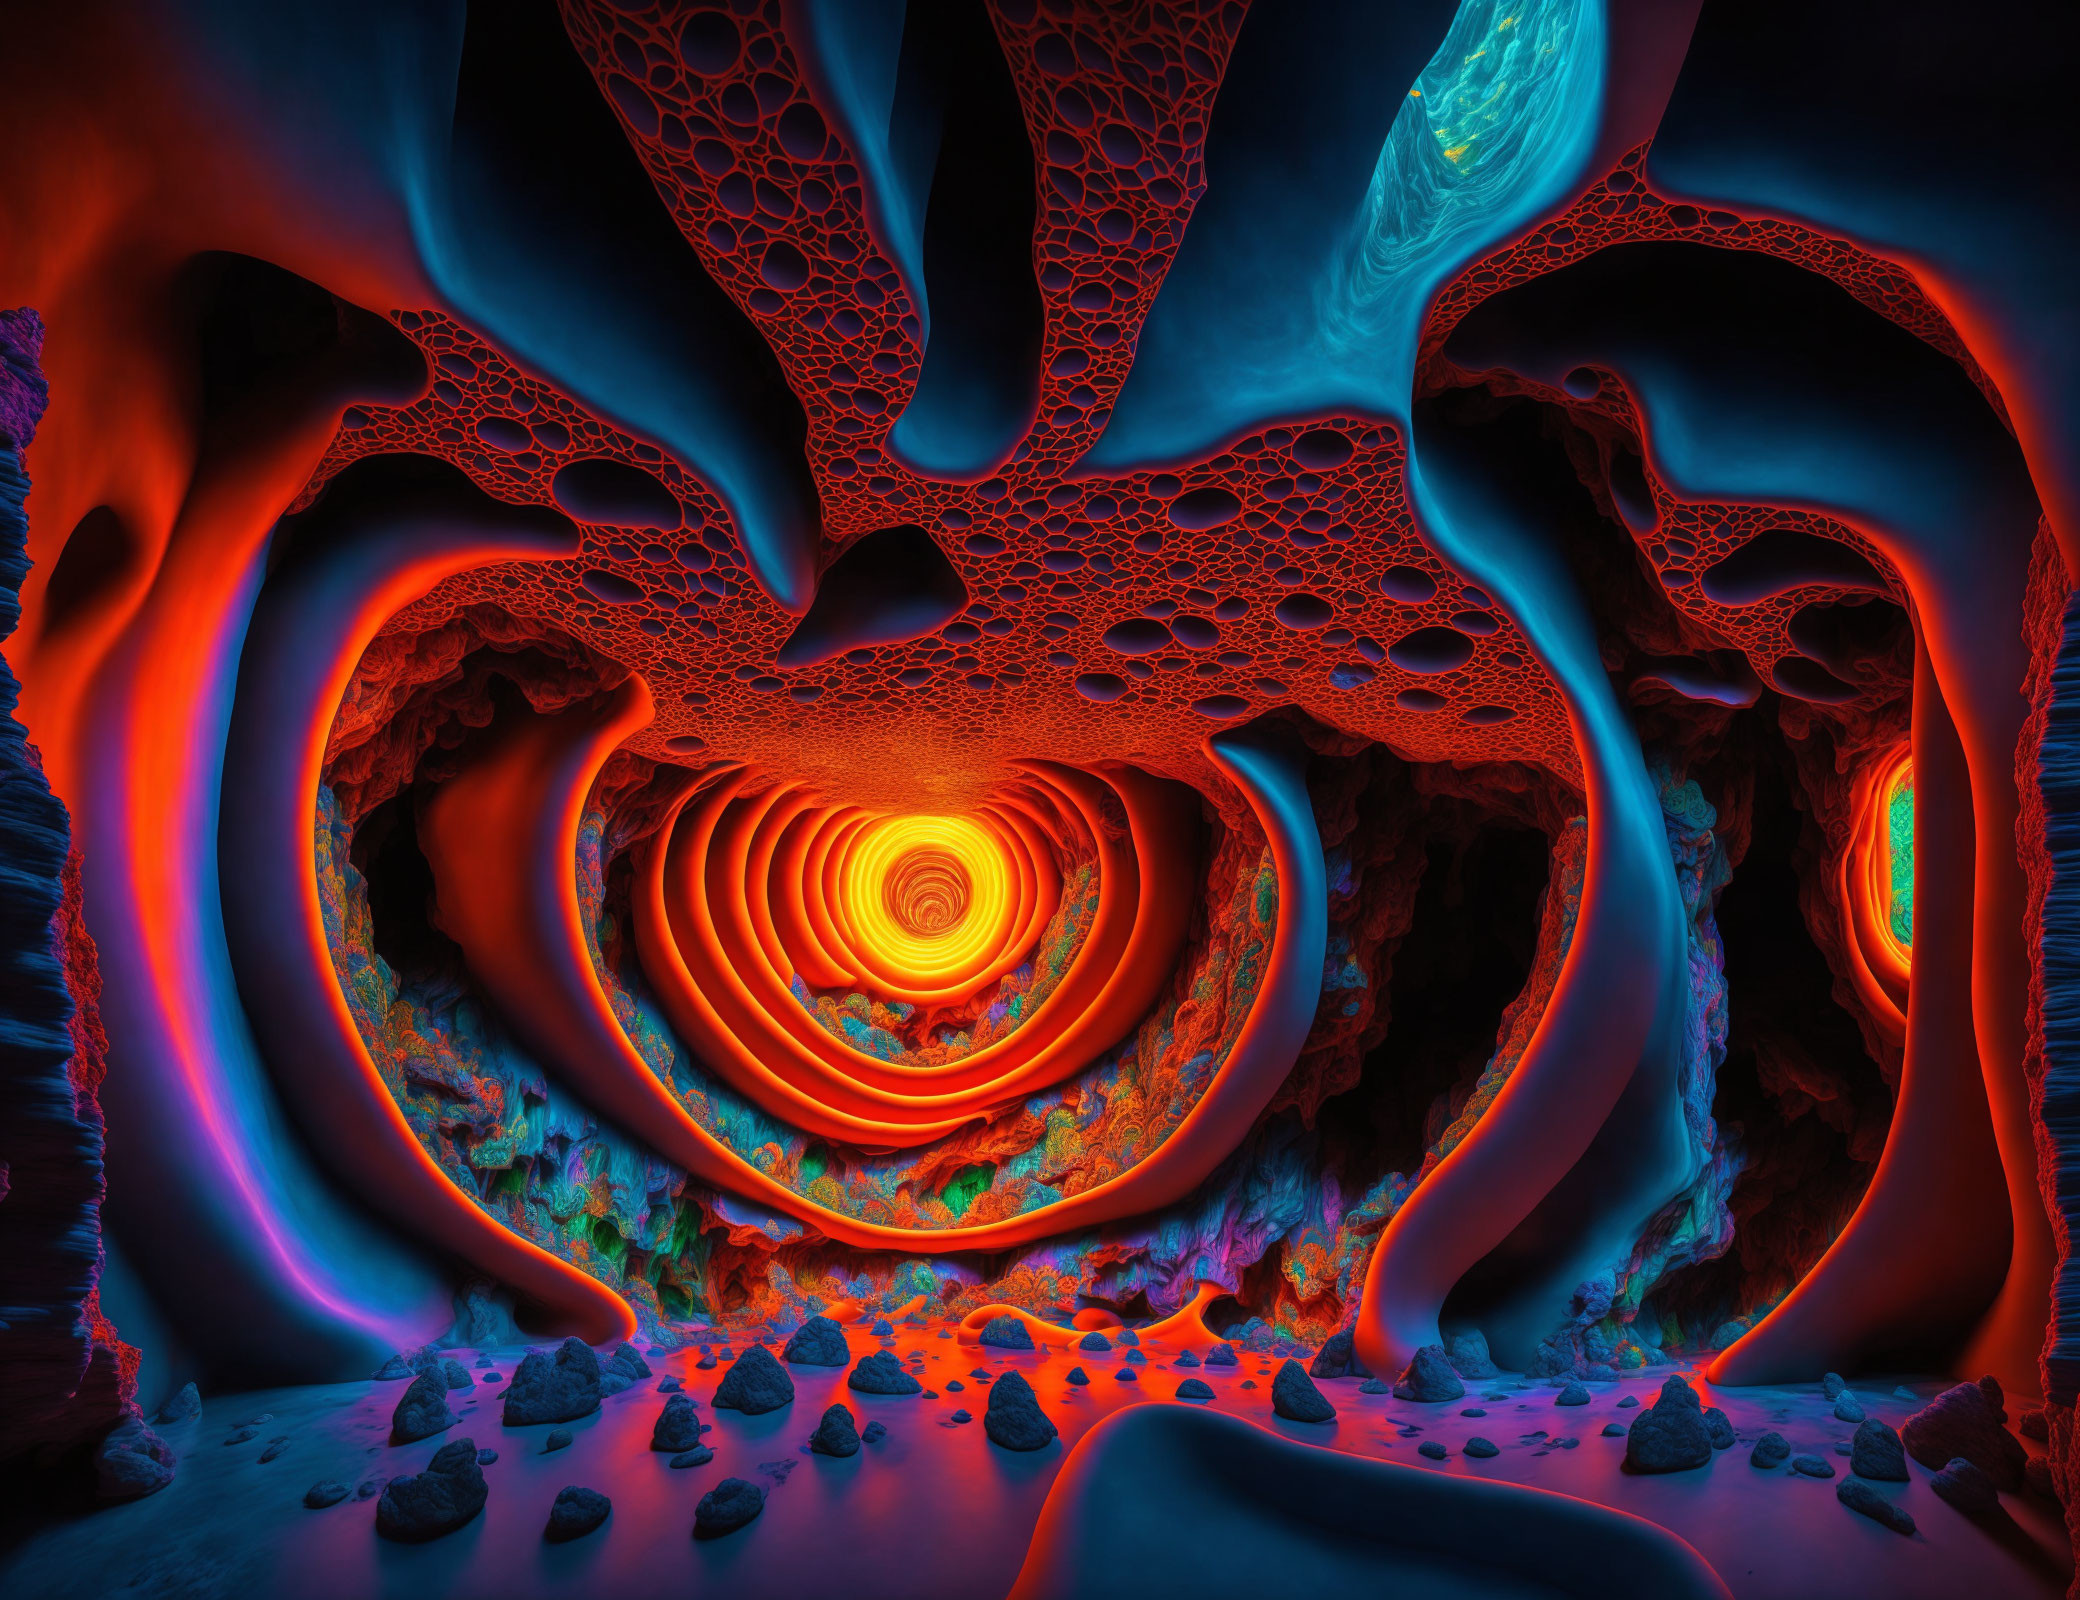 Vividly Colored Cave Scene with Swirling Patterns and Textured Walls